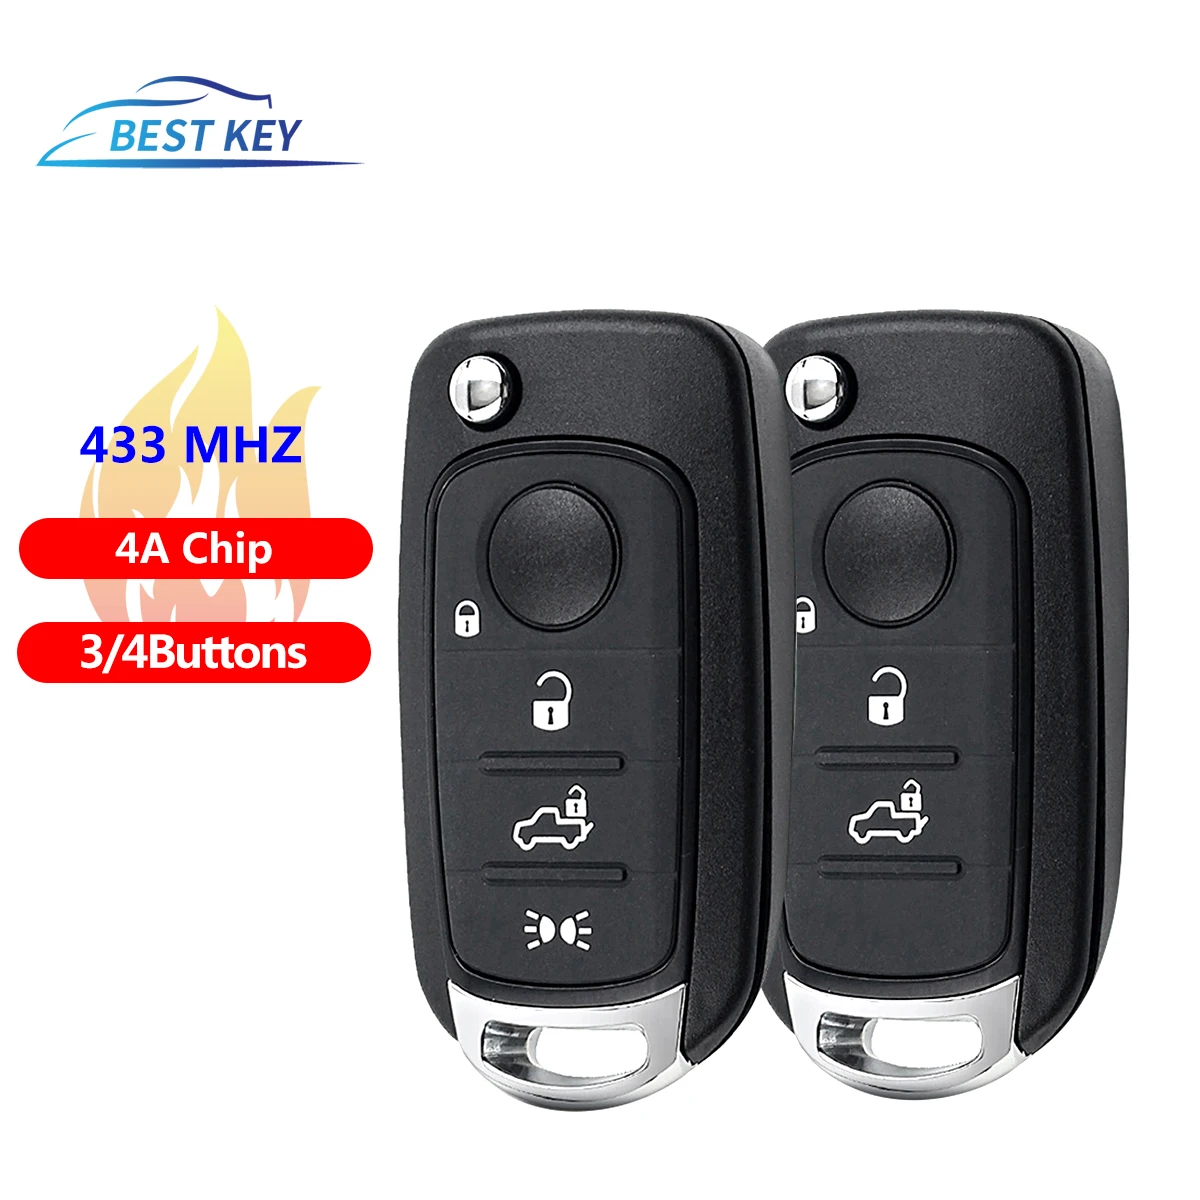 

BEST KEY 3/4 Buttons Remote Key For Fiat 500X Egea Tipo 2016 2017 2018 433.92Mhz FSK 4A Hitag-AES Chip SIP22 Blade